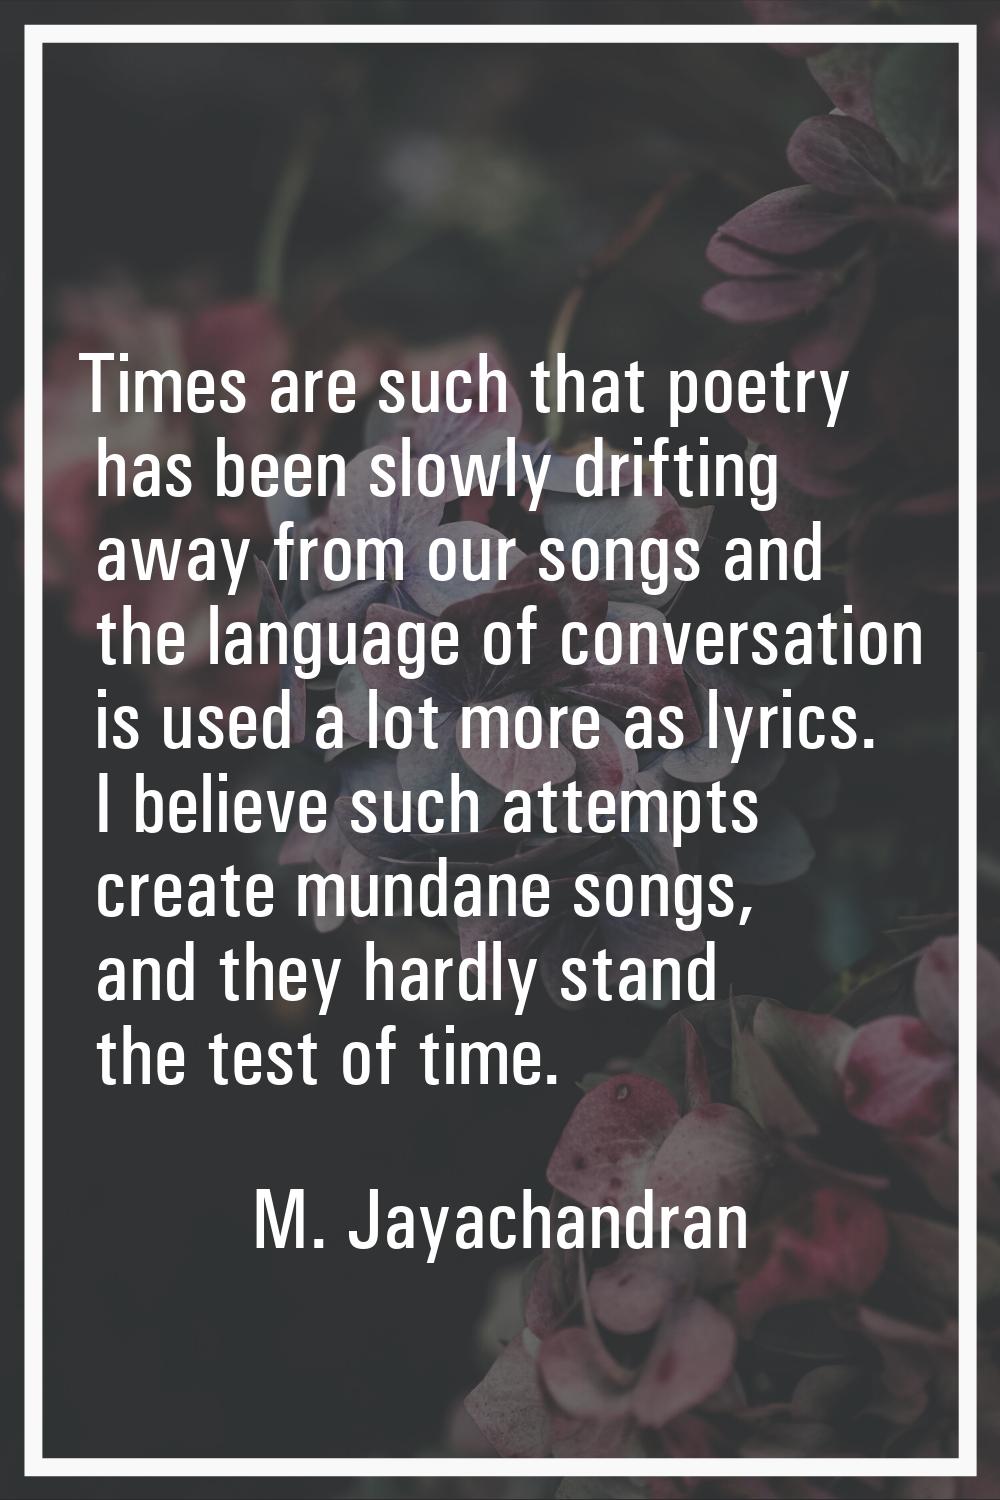 Times are such that poetry has been slowly drifting away from our songs and the language of convers